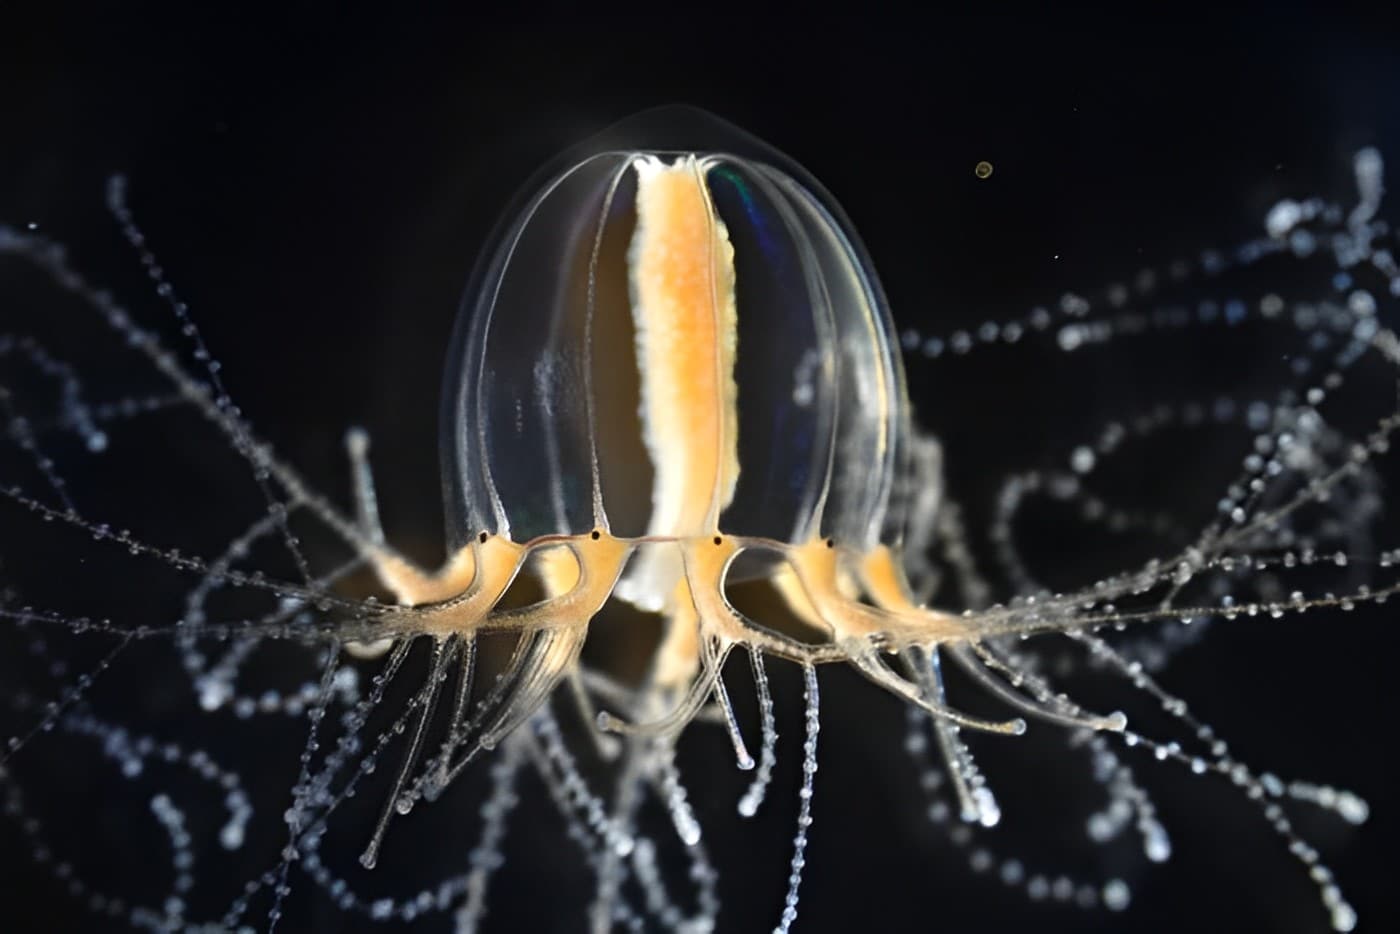 The jellyfish Cladonema pacificum exhibits branched tentacles that can robustly regenerate after amputation.